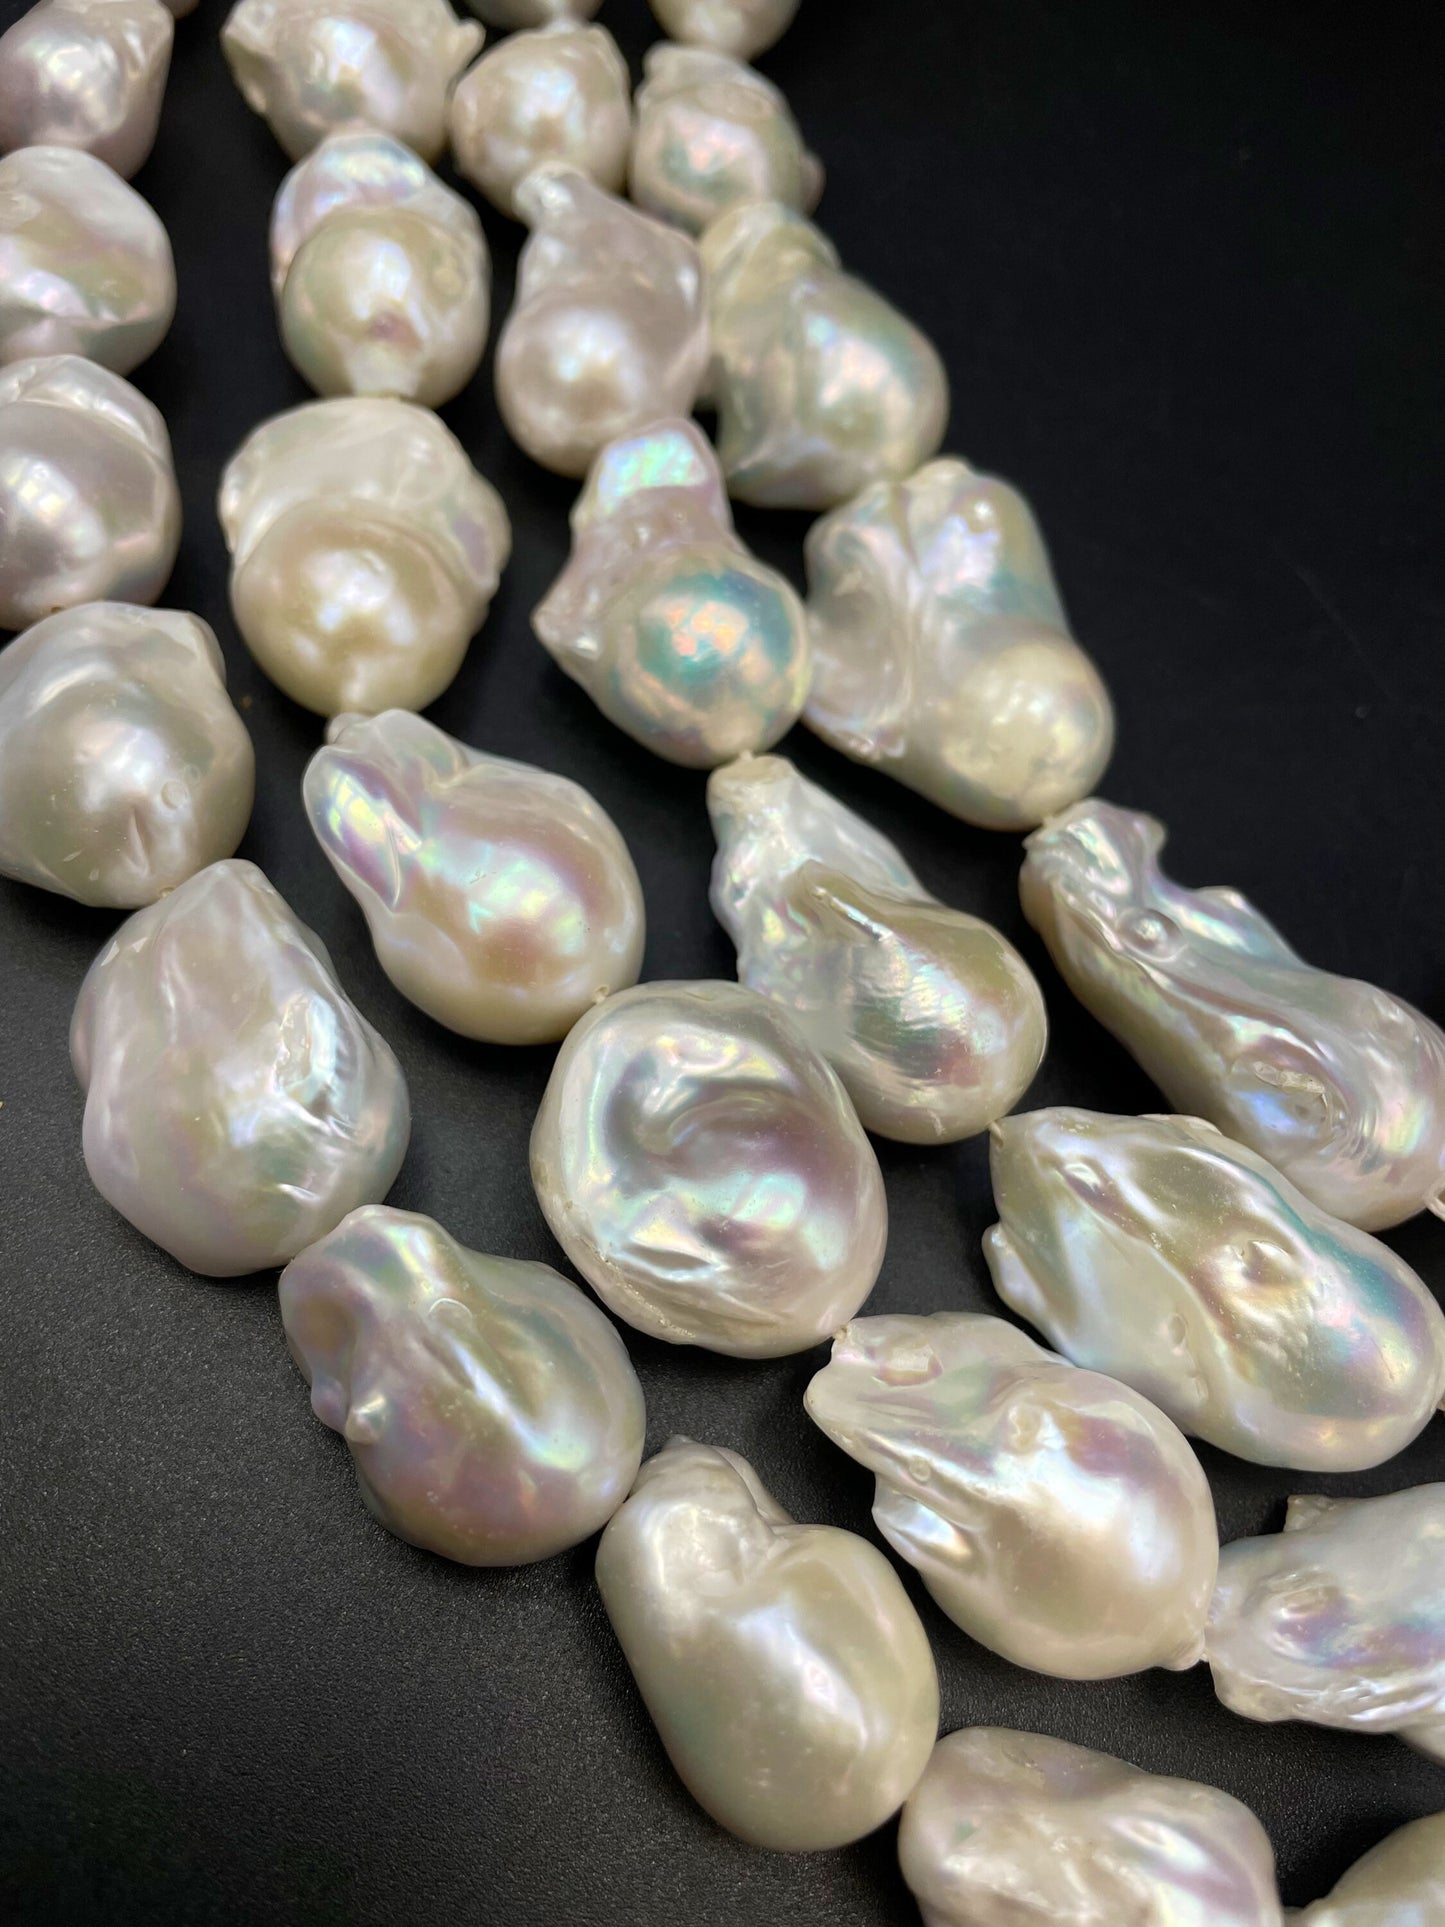 AA Natural Baroque Pearl Bead Natural Freeform Shape About 15-30mm, Beautiful Natural Ivory White Color Baroque Pearl Full Strand 15.5"